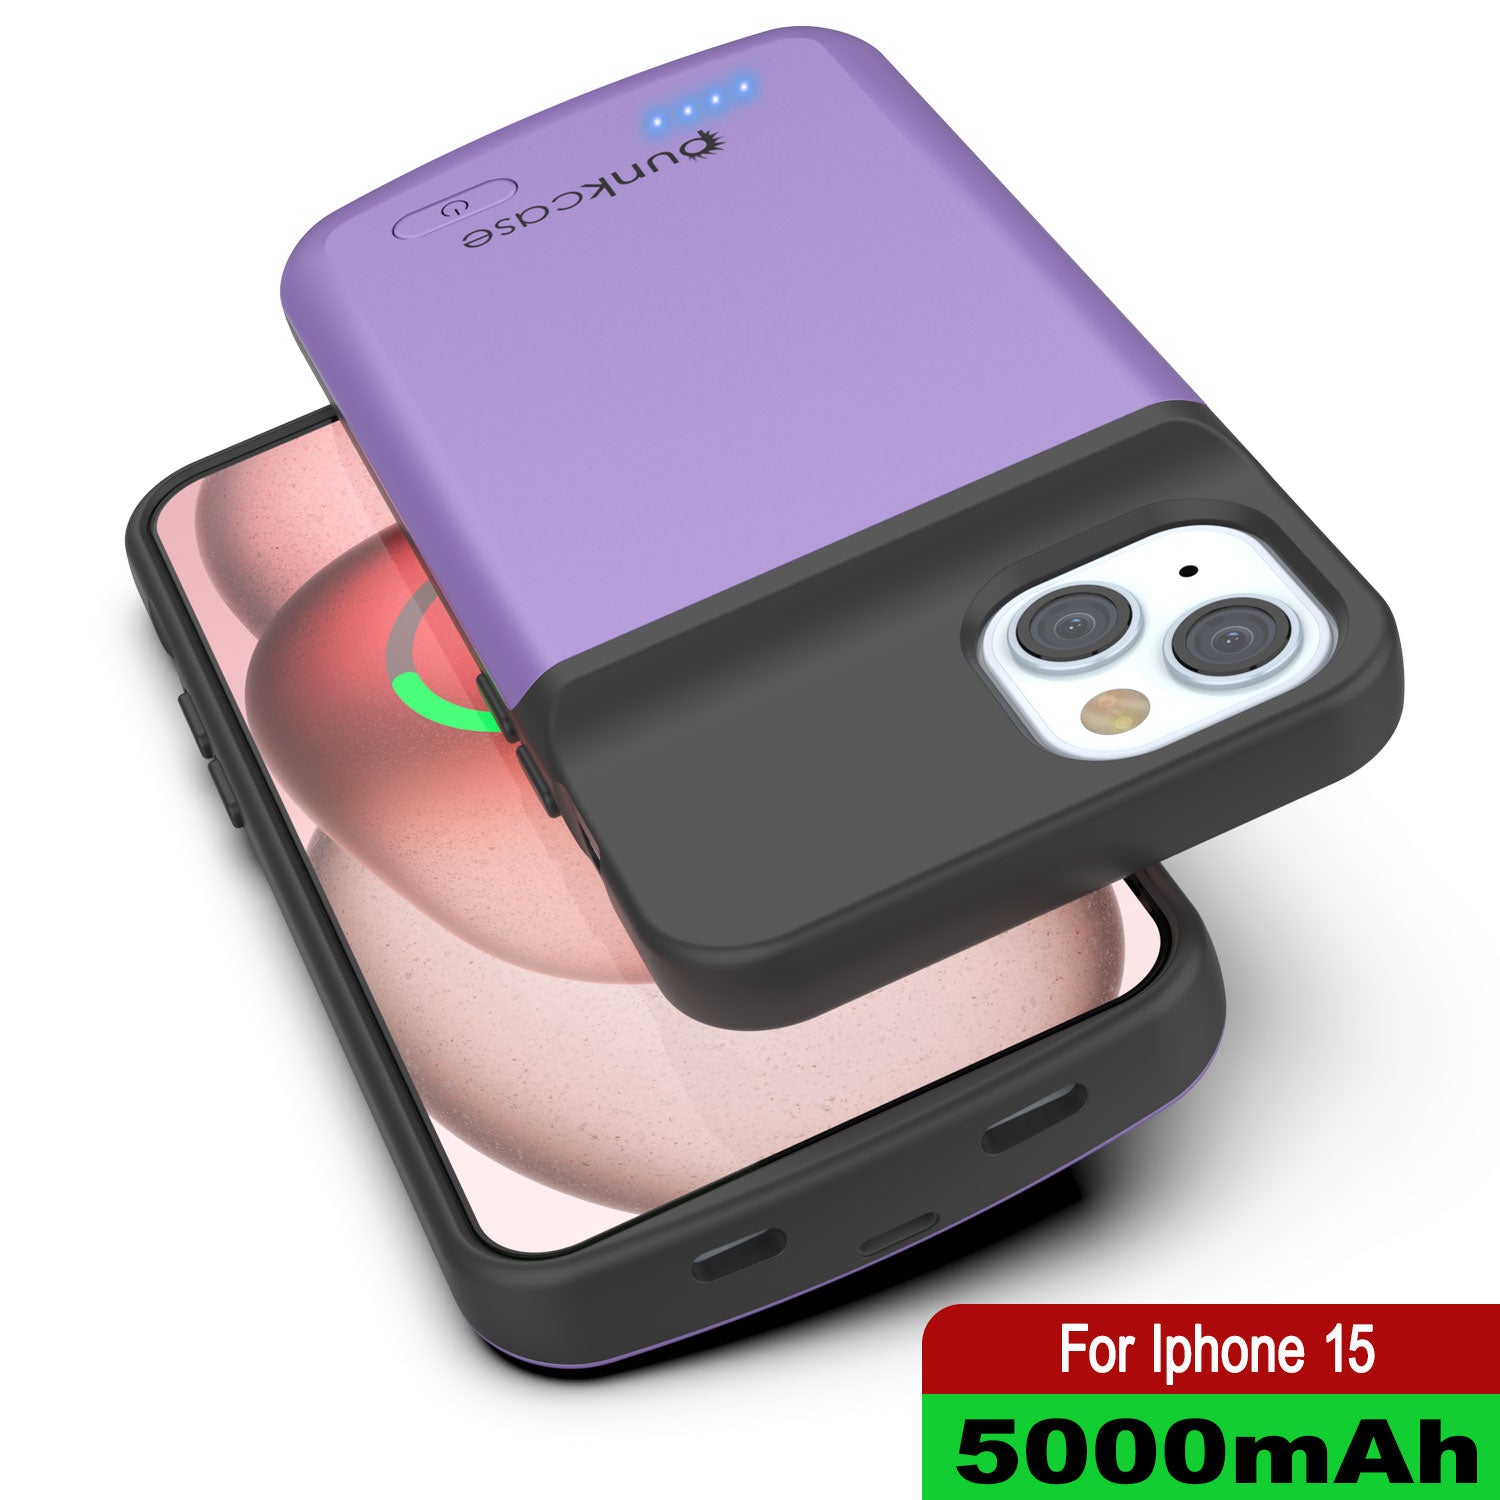 iPhone 15 Battery Case, PunkJuice 5000mAH Fast Charging Power Bank W/ Screen Protector | [Purple]